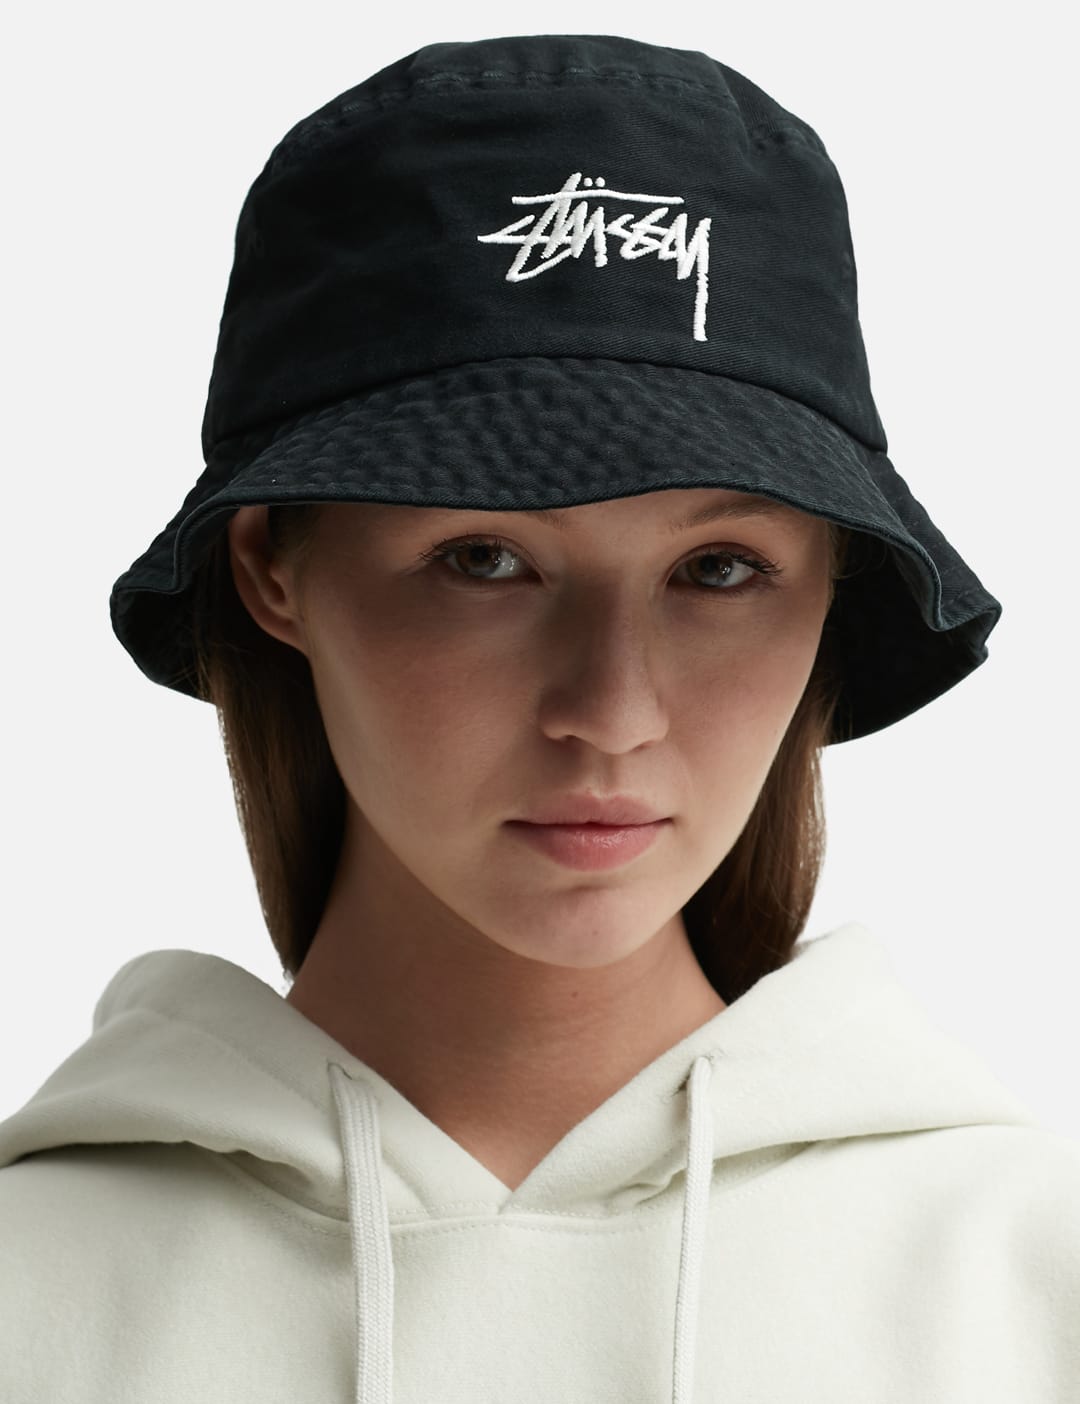 Stüssy - Big Stock Bucket Hat | HBX - Globally Curated Fashion and 